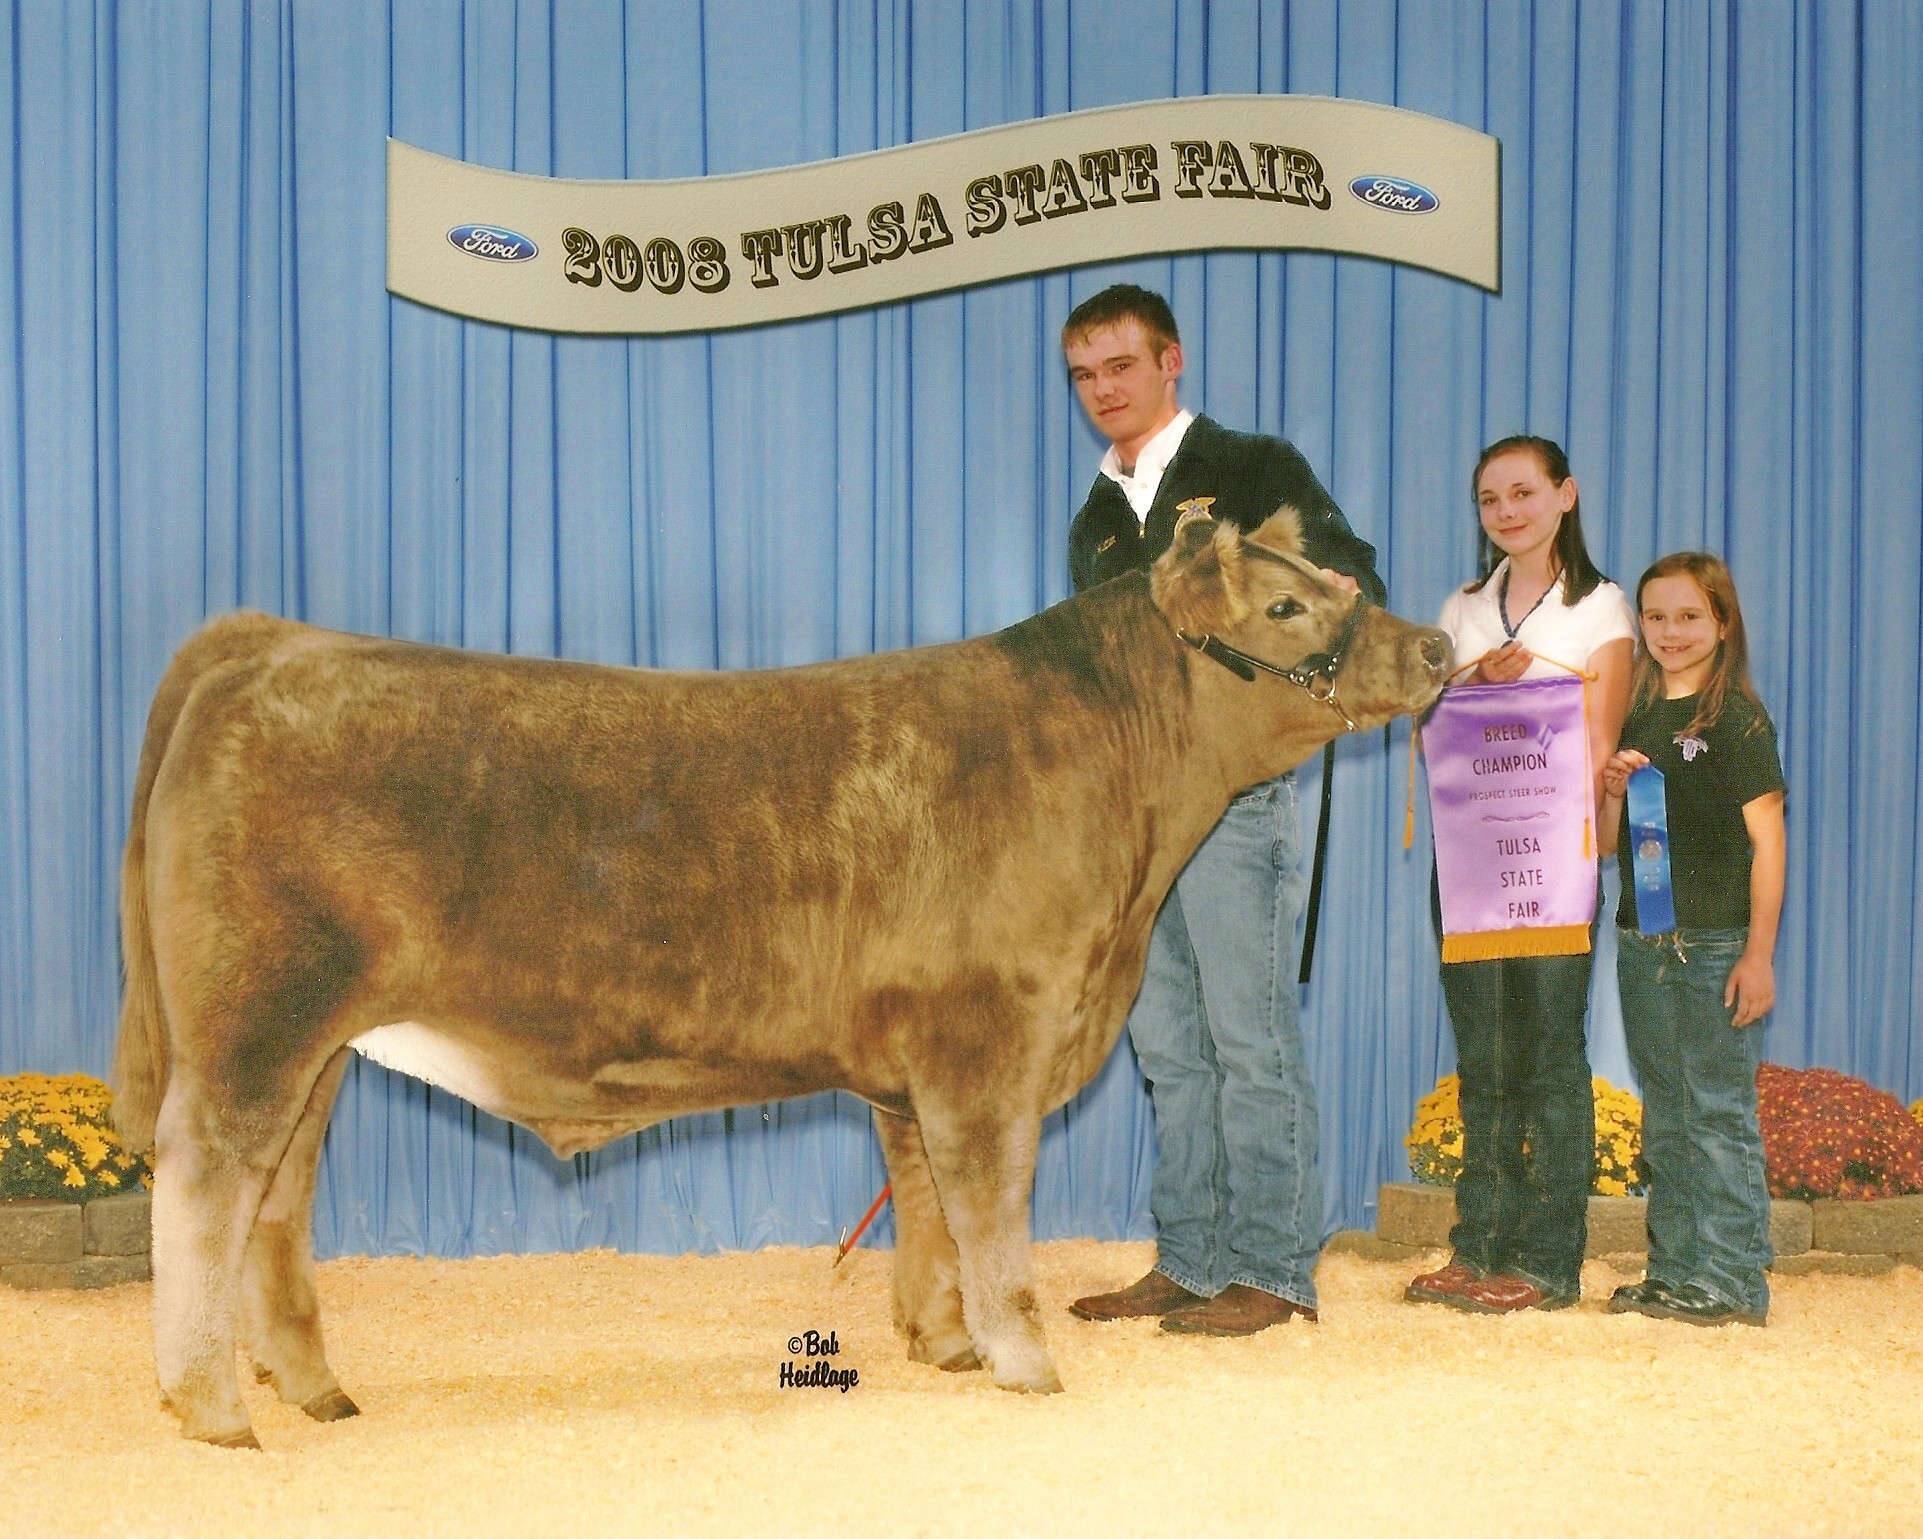 Our Military Kids awards grants to children of service members that pay for extracurricular activities. One grant helped a recipient in Oklahoma raise an award-winning steer. (Photo: Linda Davidson/Our Military Kids)